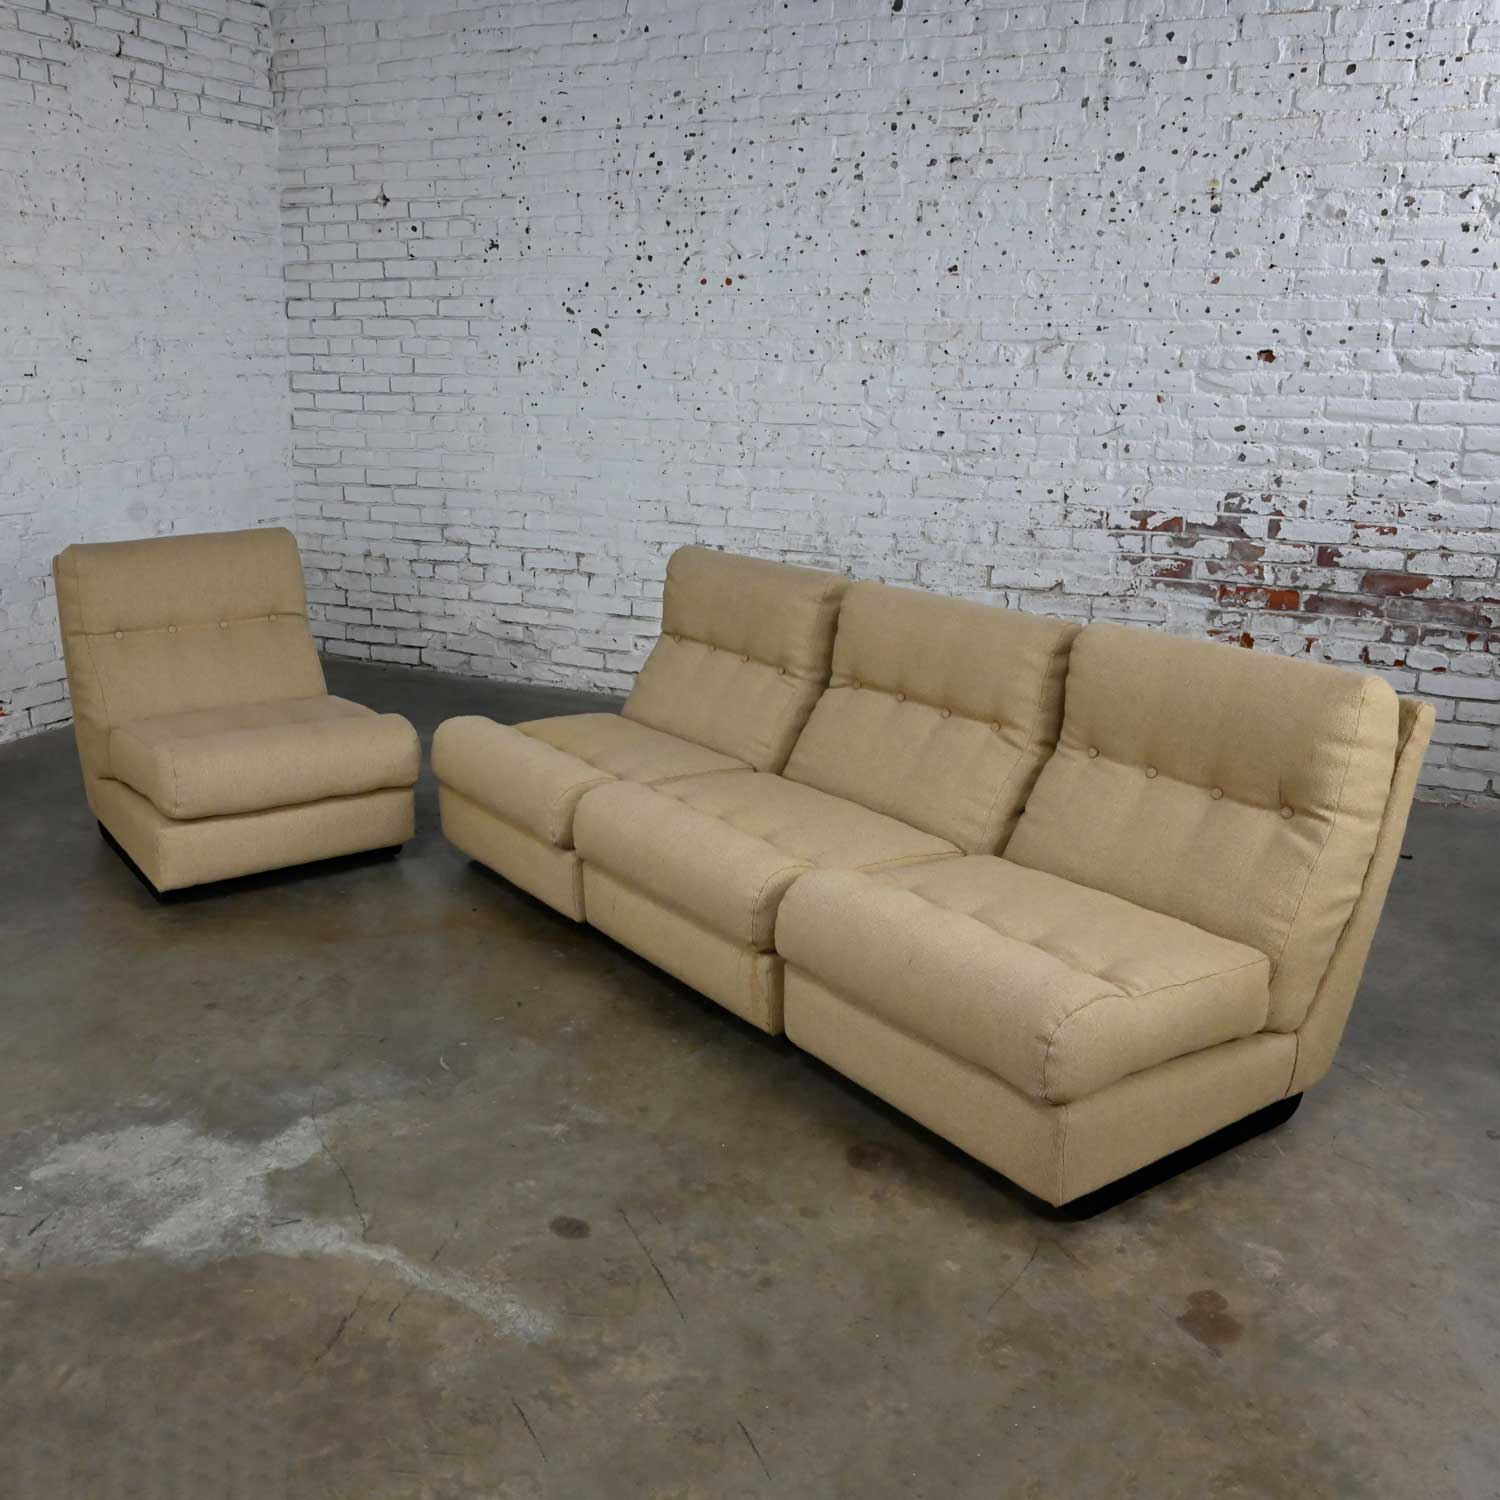 Awesome vintage Scandinavian Modern khaki hopsacking fabric 4-piece modular sofa made in Sweden. Beautiful condition, keeping in mind that this is vintage and not new so will have signs of use and wear. The bases have a fresh coat of black paint. It